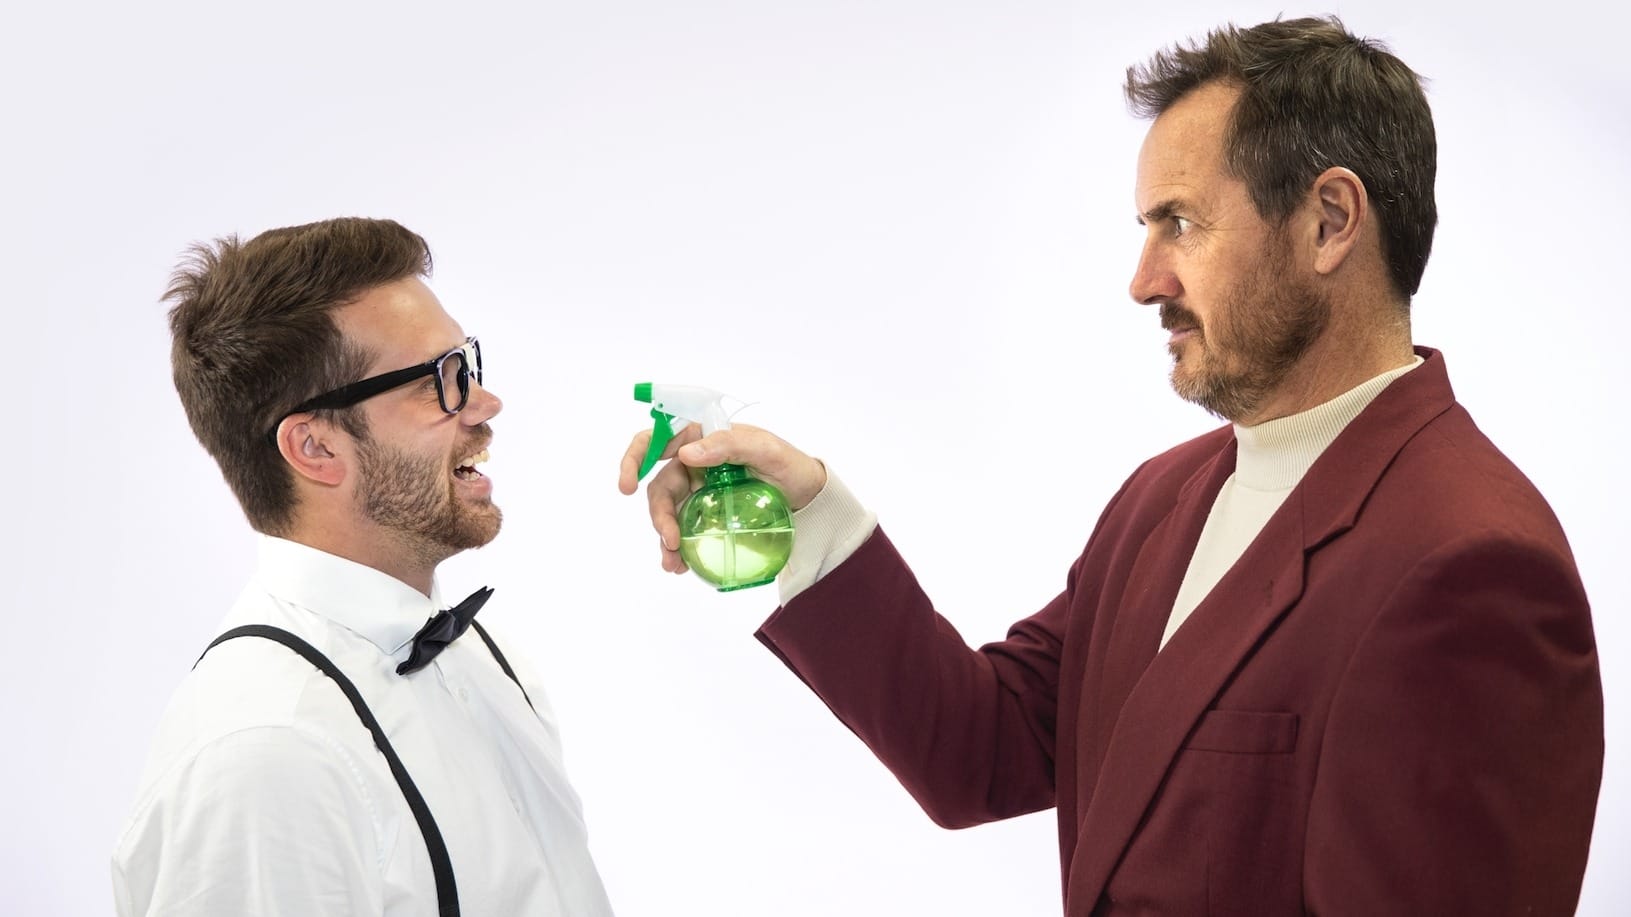 Person holding spray can pointing at another person with glasses, bow tie and suspenders